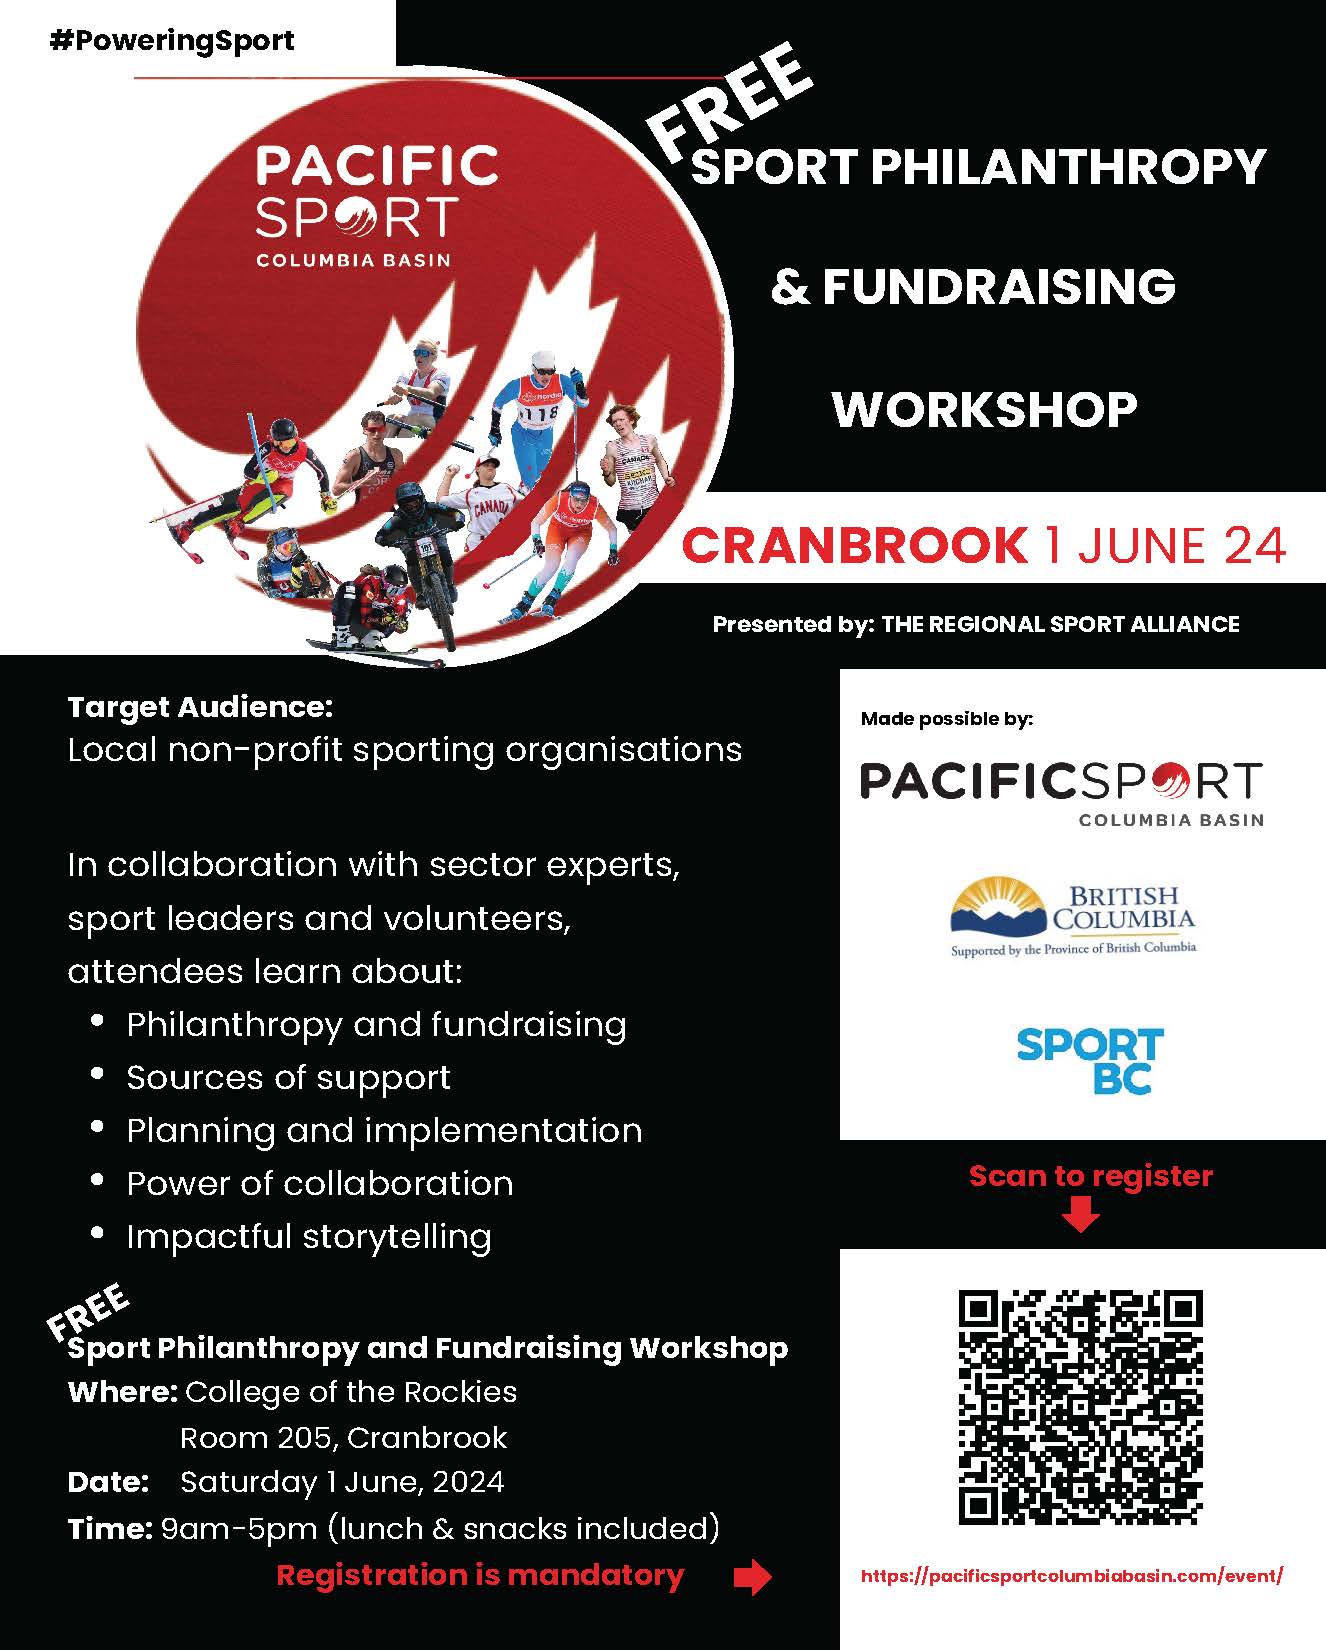 Free Sport Philanthropy and Fundraising Workshop